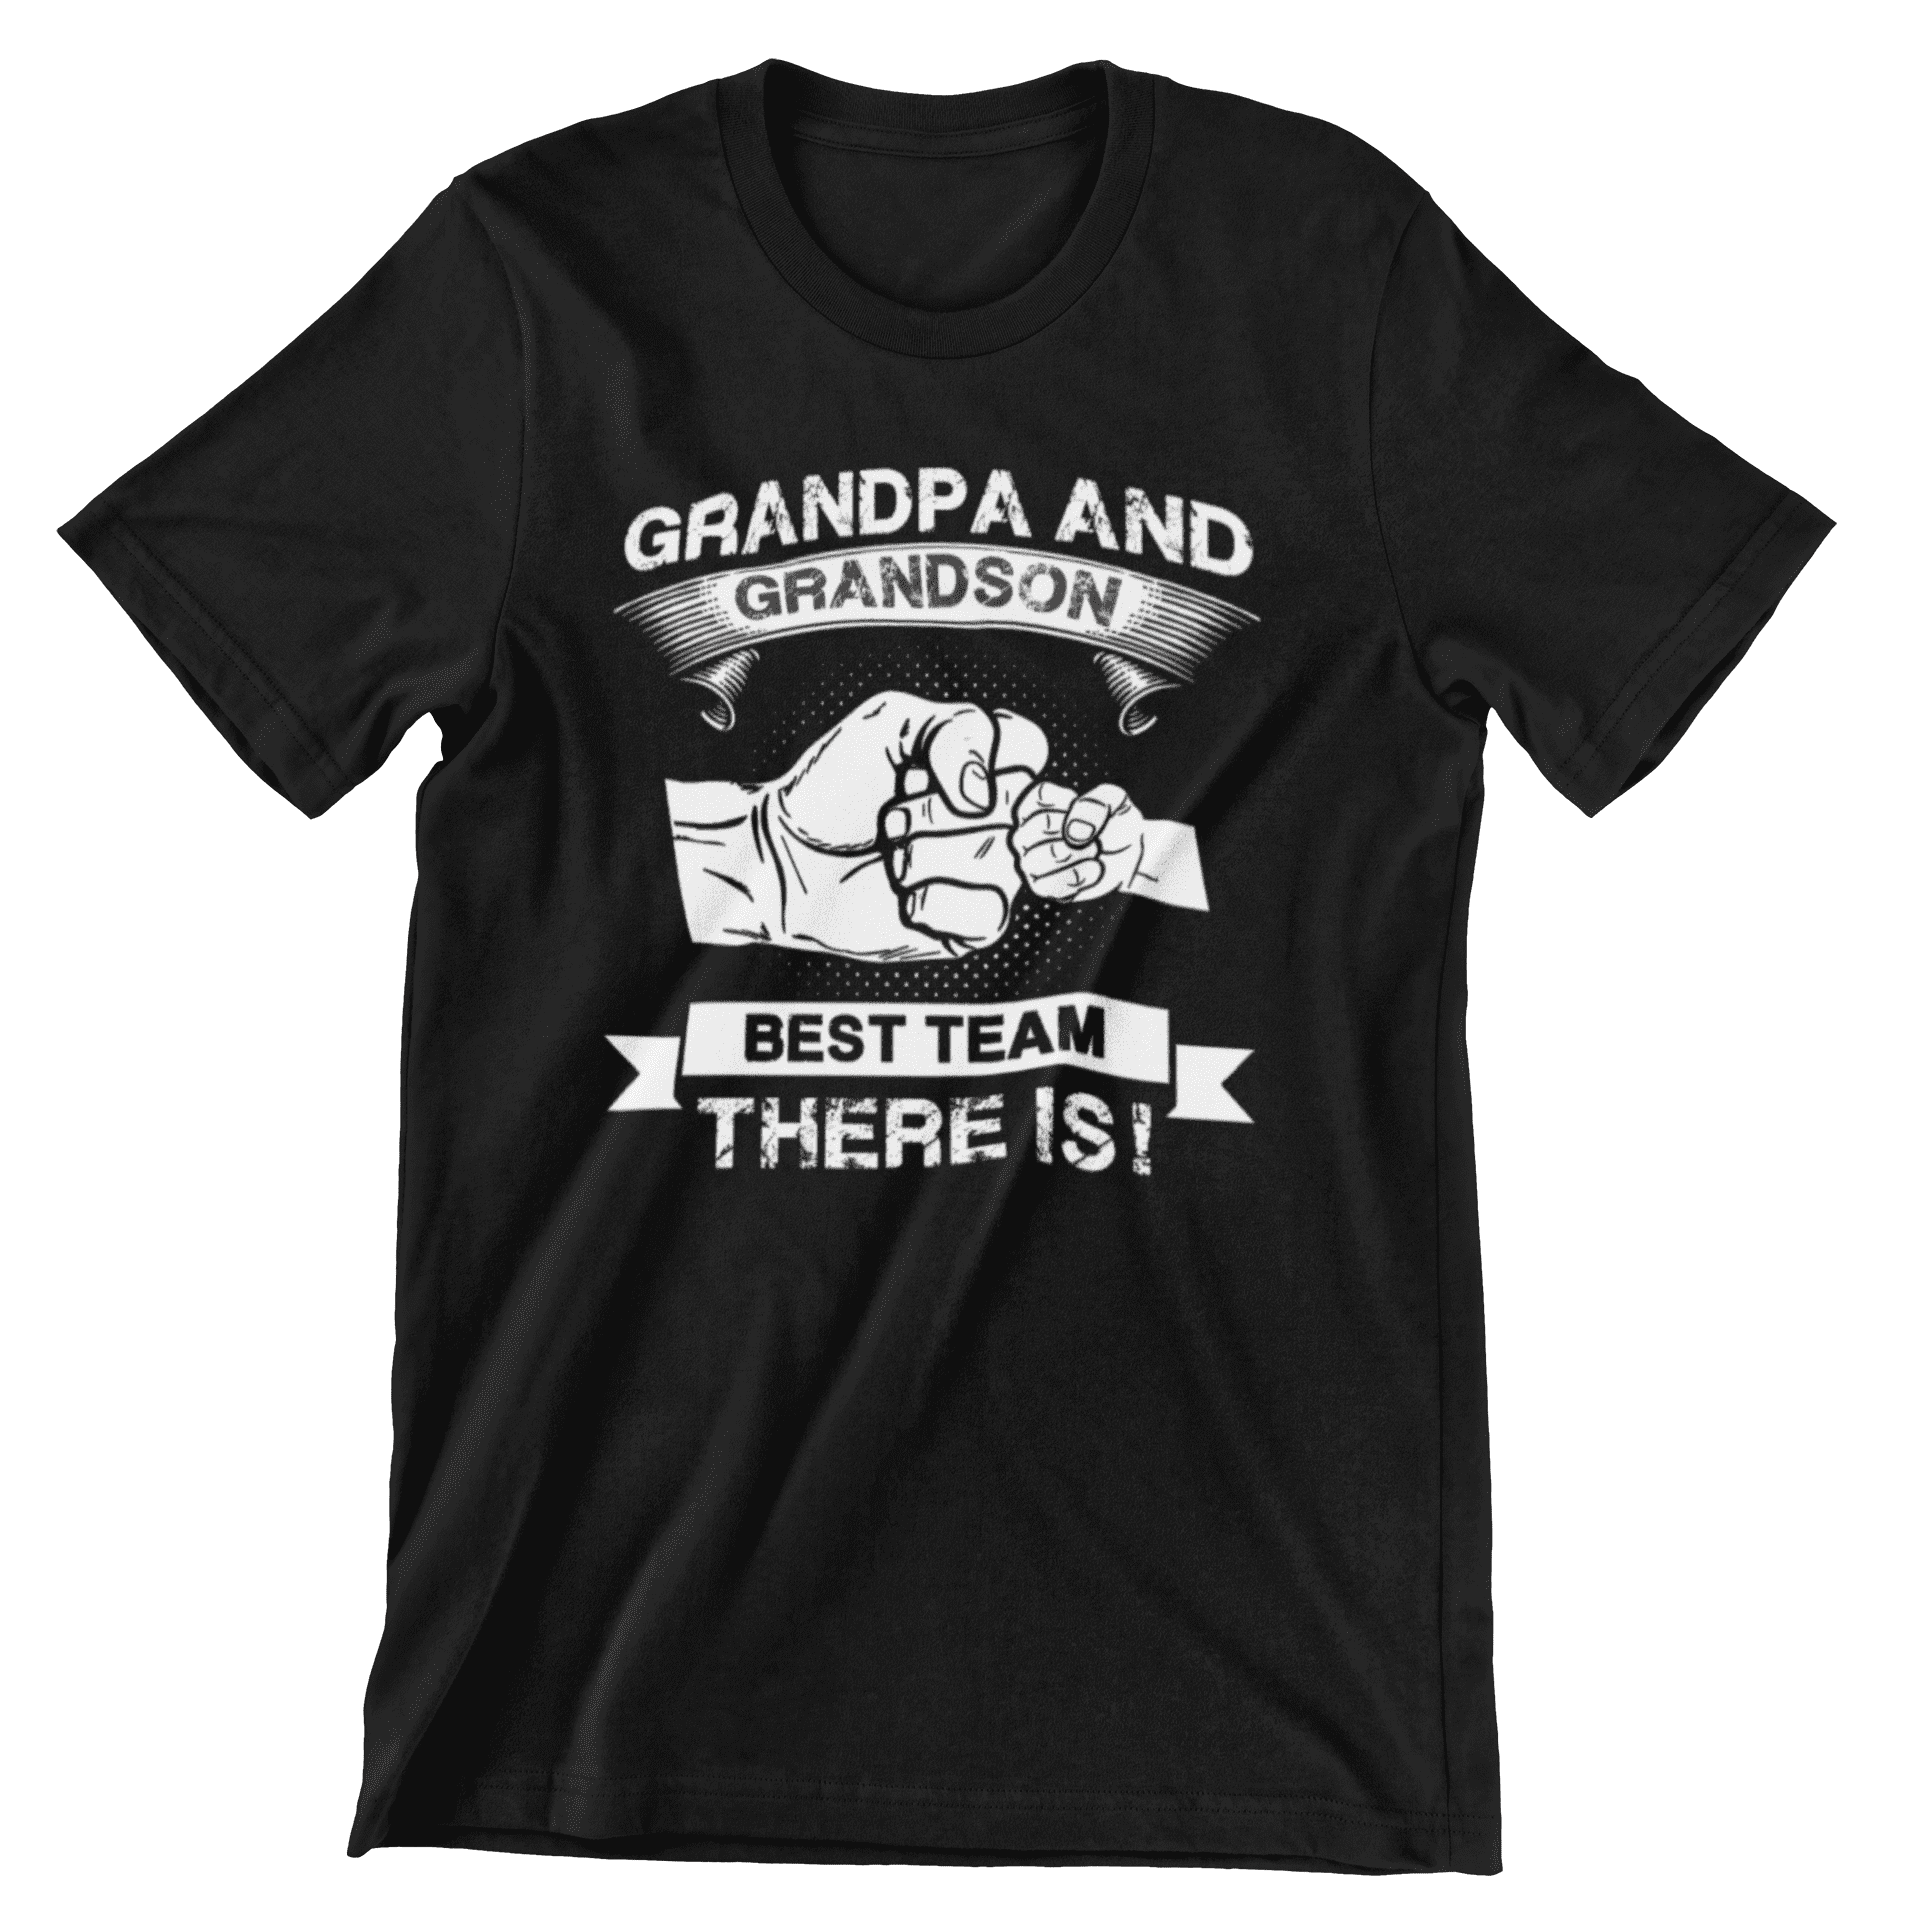 Grandpa Grandson T Shirt Grandpa And Grandson Best Team There Is T Shirt Fathers Day T 